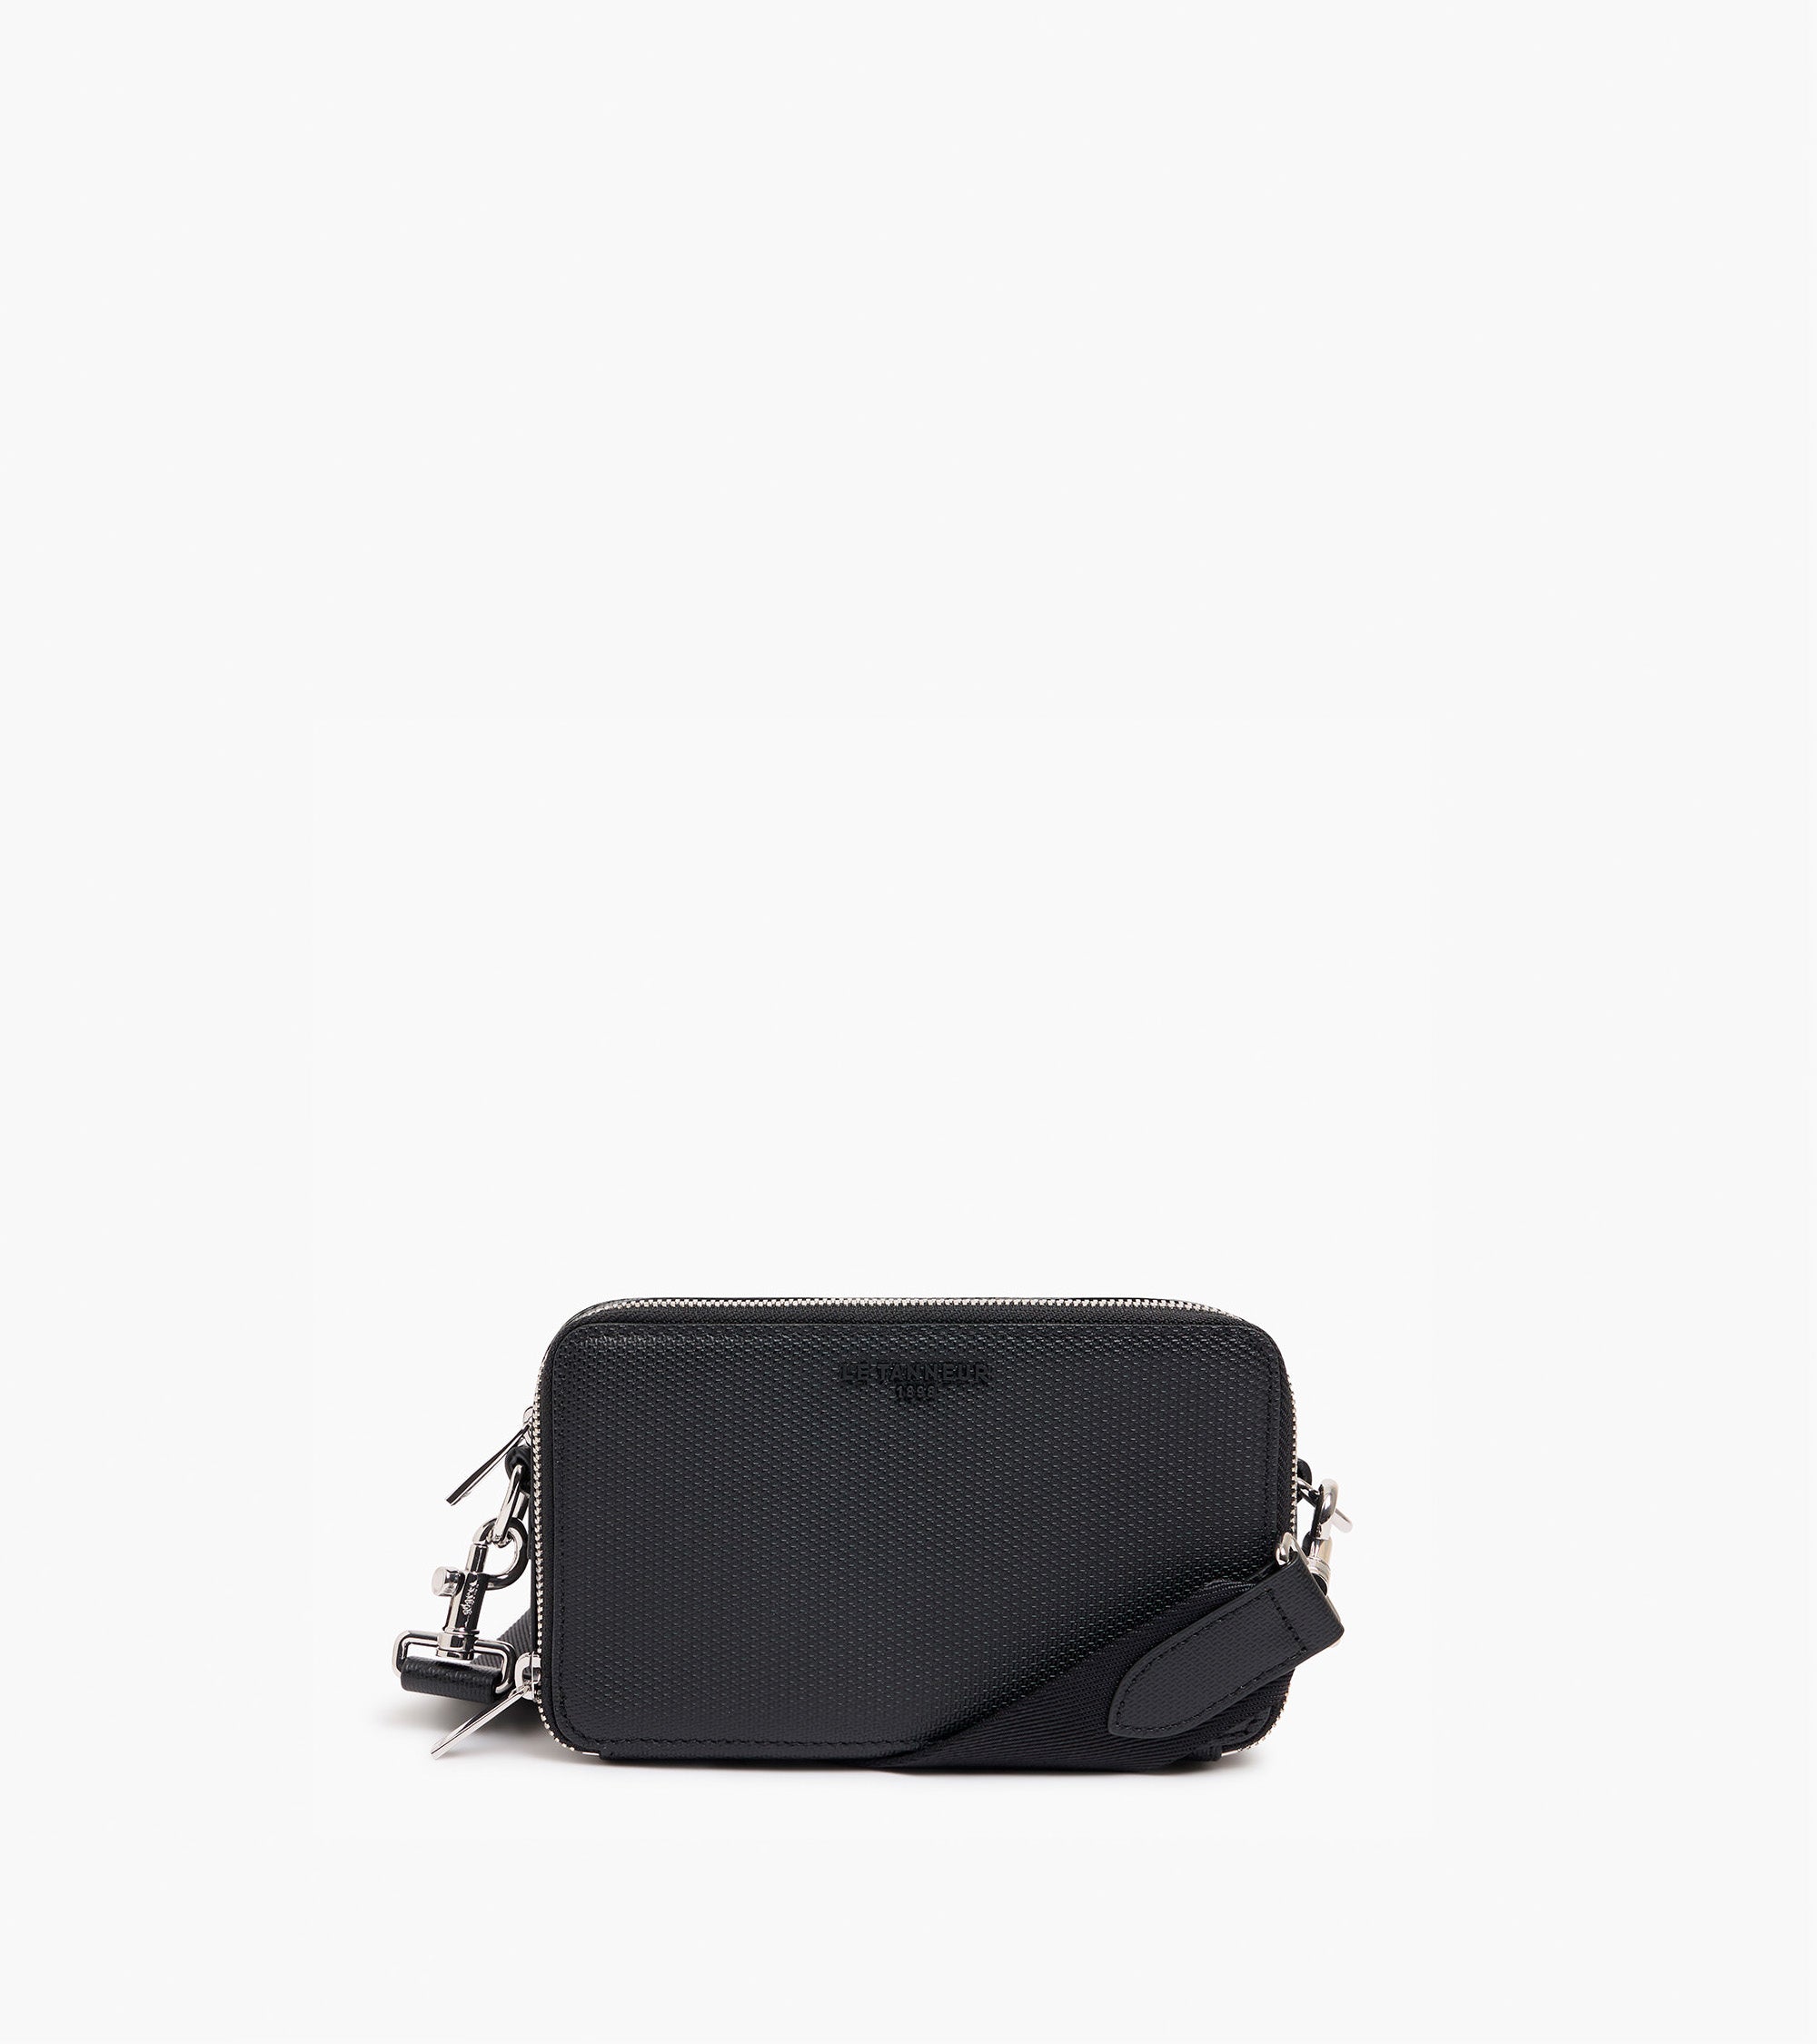 Emile small 2-compartment shoulder bag in signature T leather